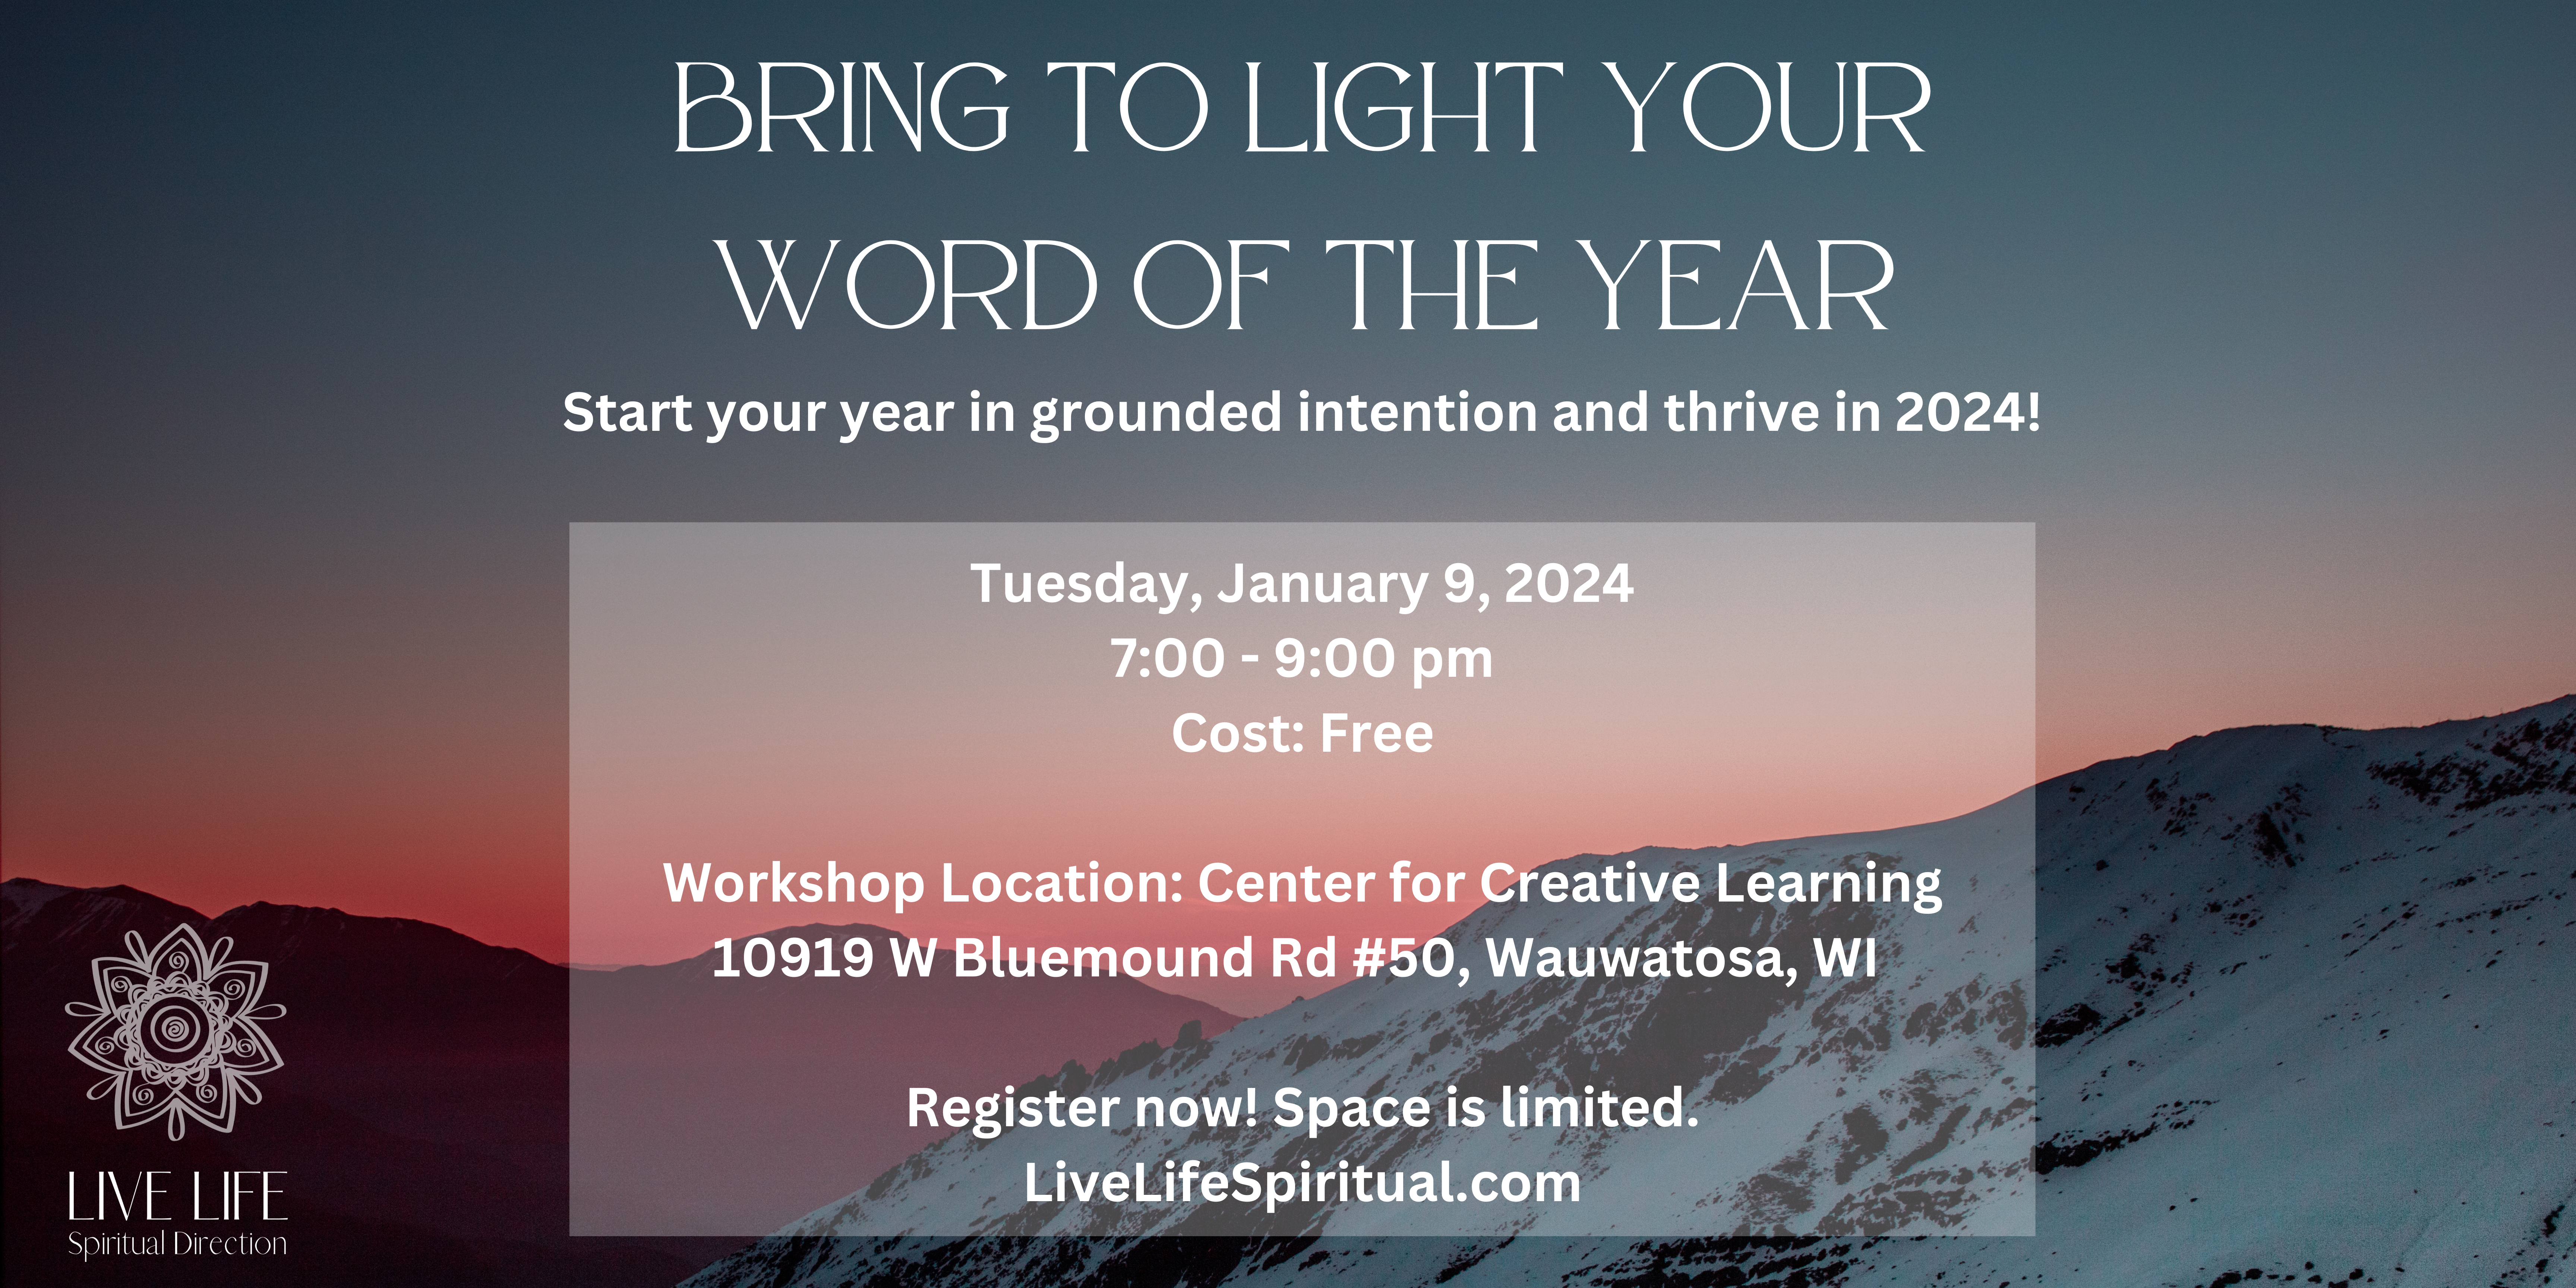 Bring to Light Your Word of the Year - Start your year in grounded intention and thrive in 2024! Saturday, January 9, 2024, 7:00-9:00 pm; Cost: free; Register now! Space is limited. LiveLifeSpiritual.com